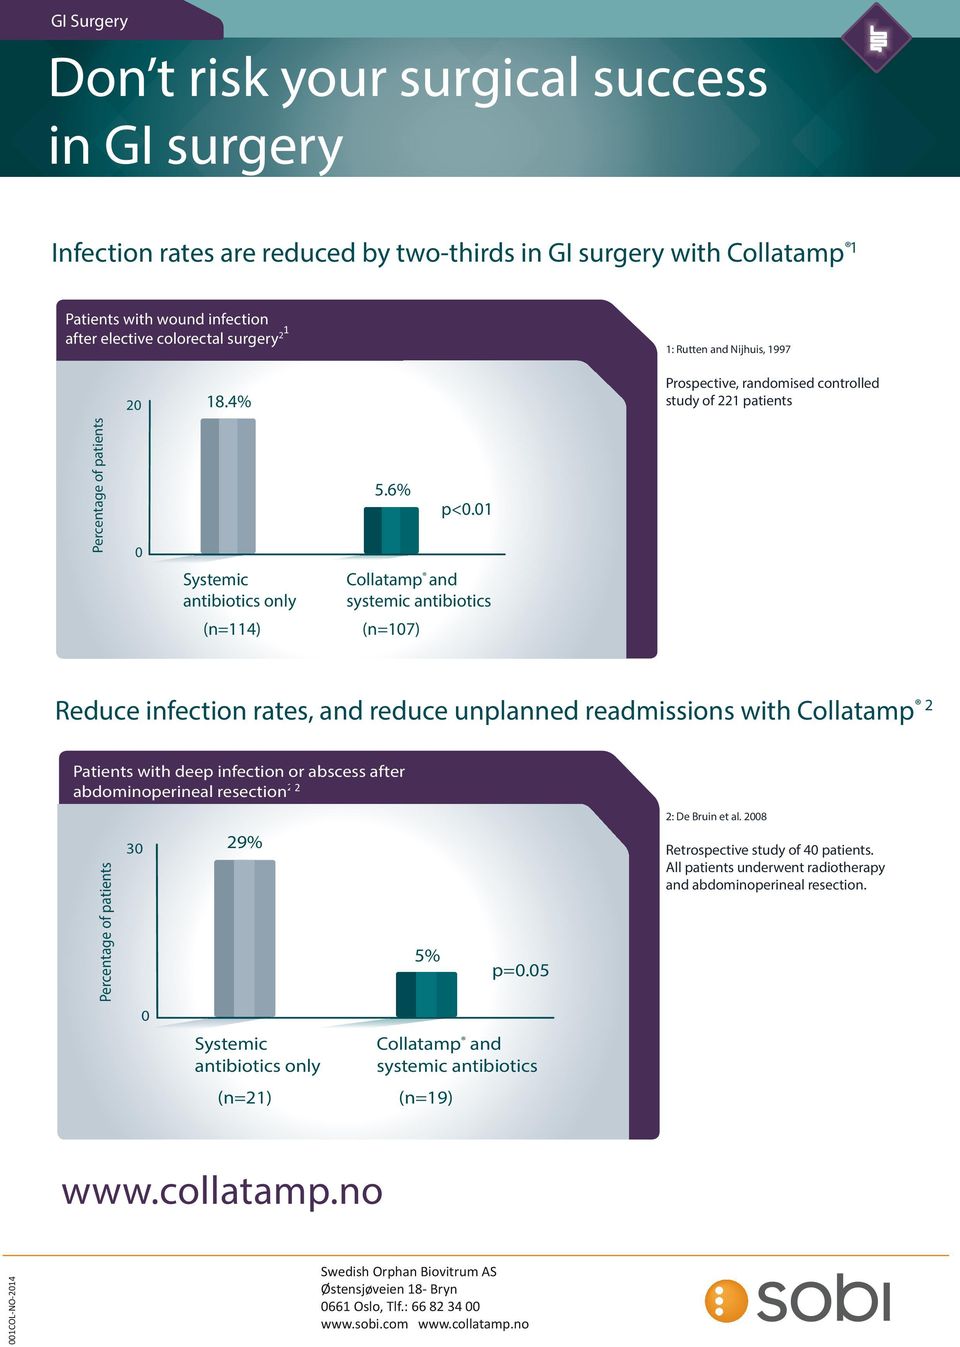 01 Systemic antibiotics only Collatamp and systemic antibiotics (n=114) (n=107) Reduce infection rates, and reduce unplanned readmissions with Collatamp 2 Patients with deep infection or abscess